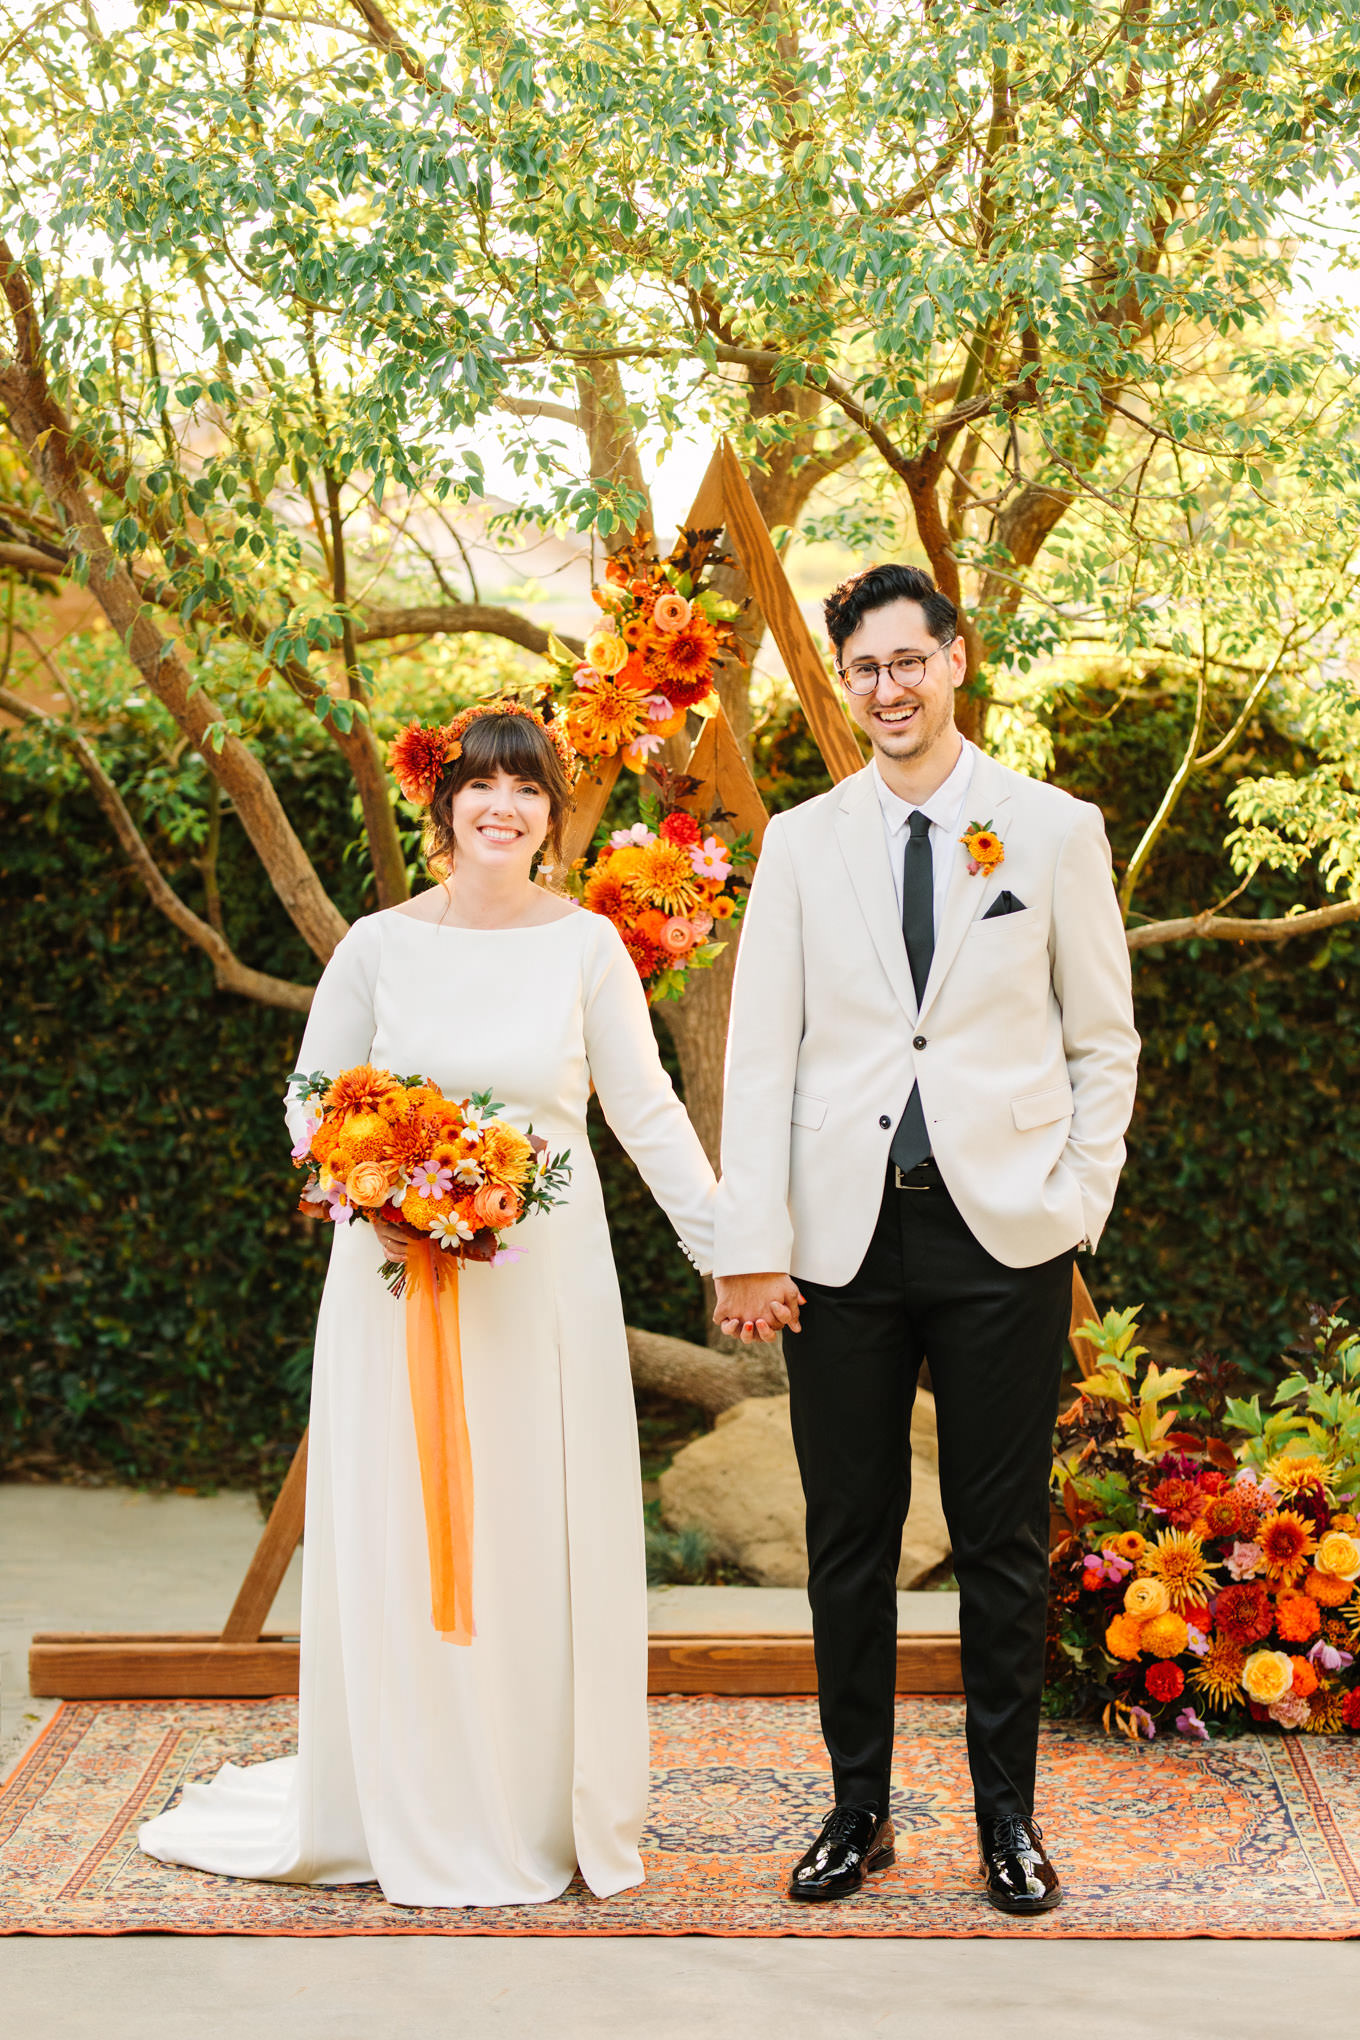 Bride and groom holding hands with unique backdrop | Vibrant backyard micro wedding featured on Green Wedding Shoes | Colorful LA wedding photography | #losangeleswedding #backyardwedding #microwedding #laweddingphotographer Source: Mary Costa Photography | Los Angeles